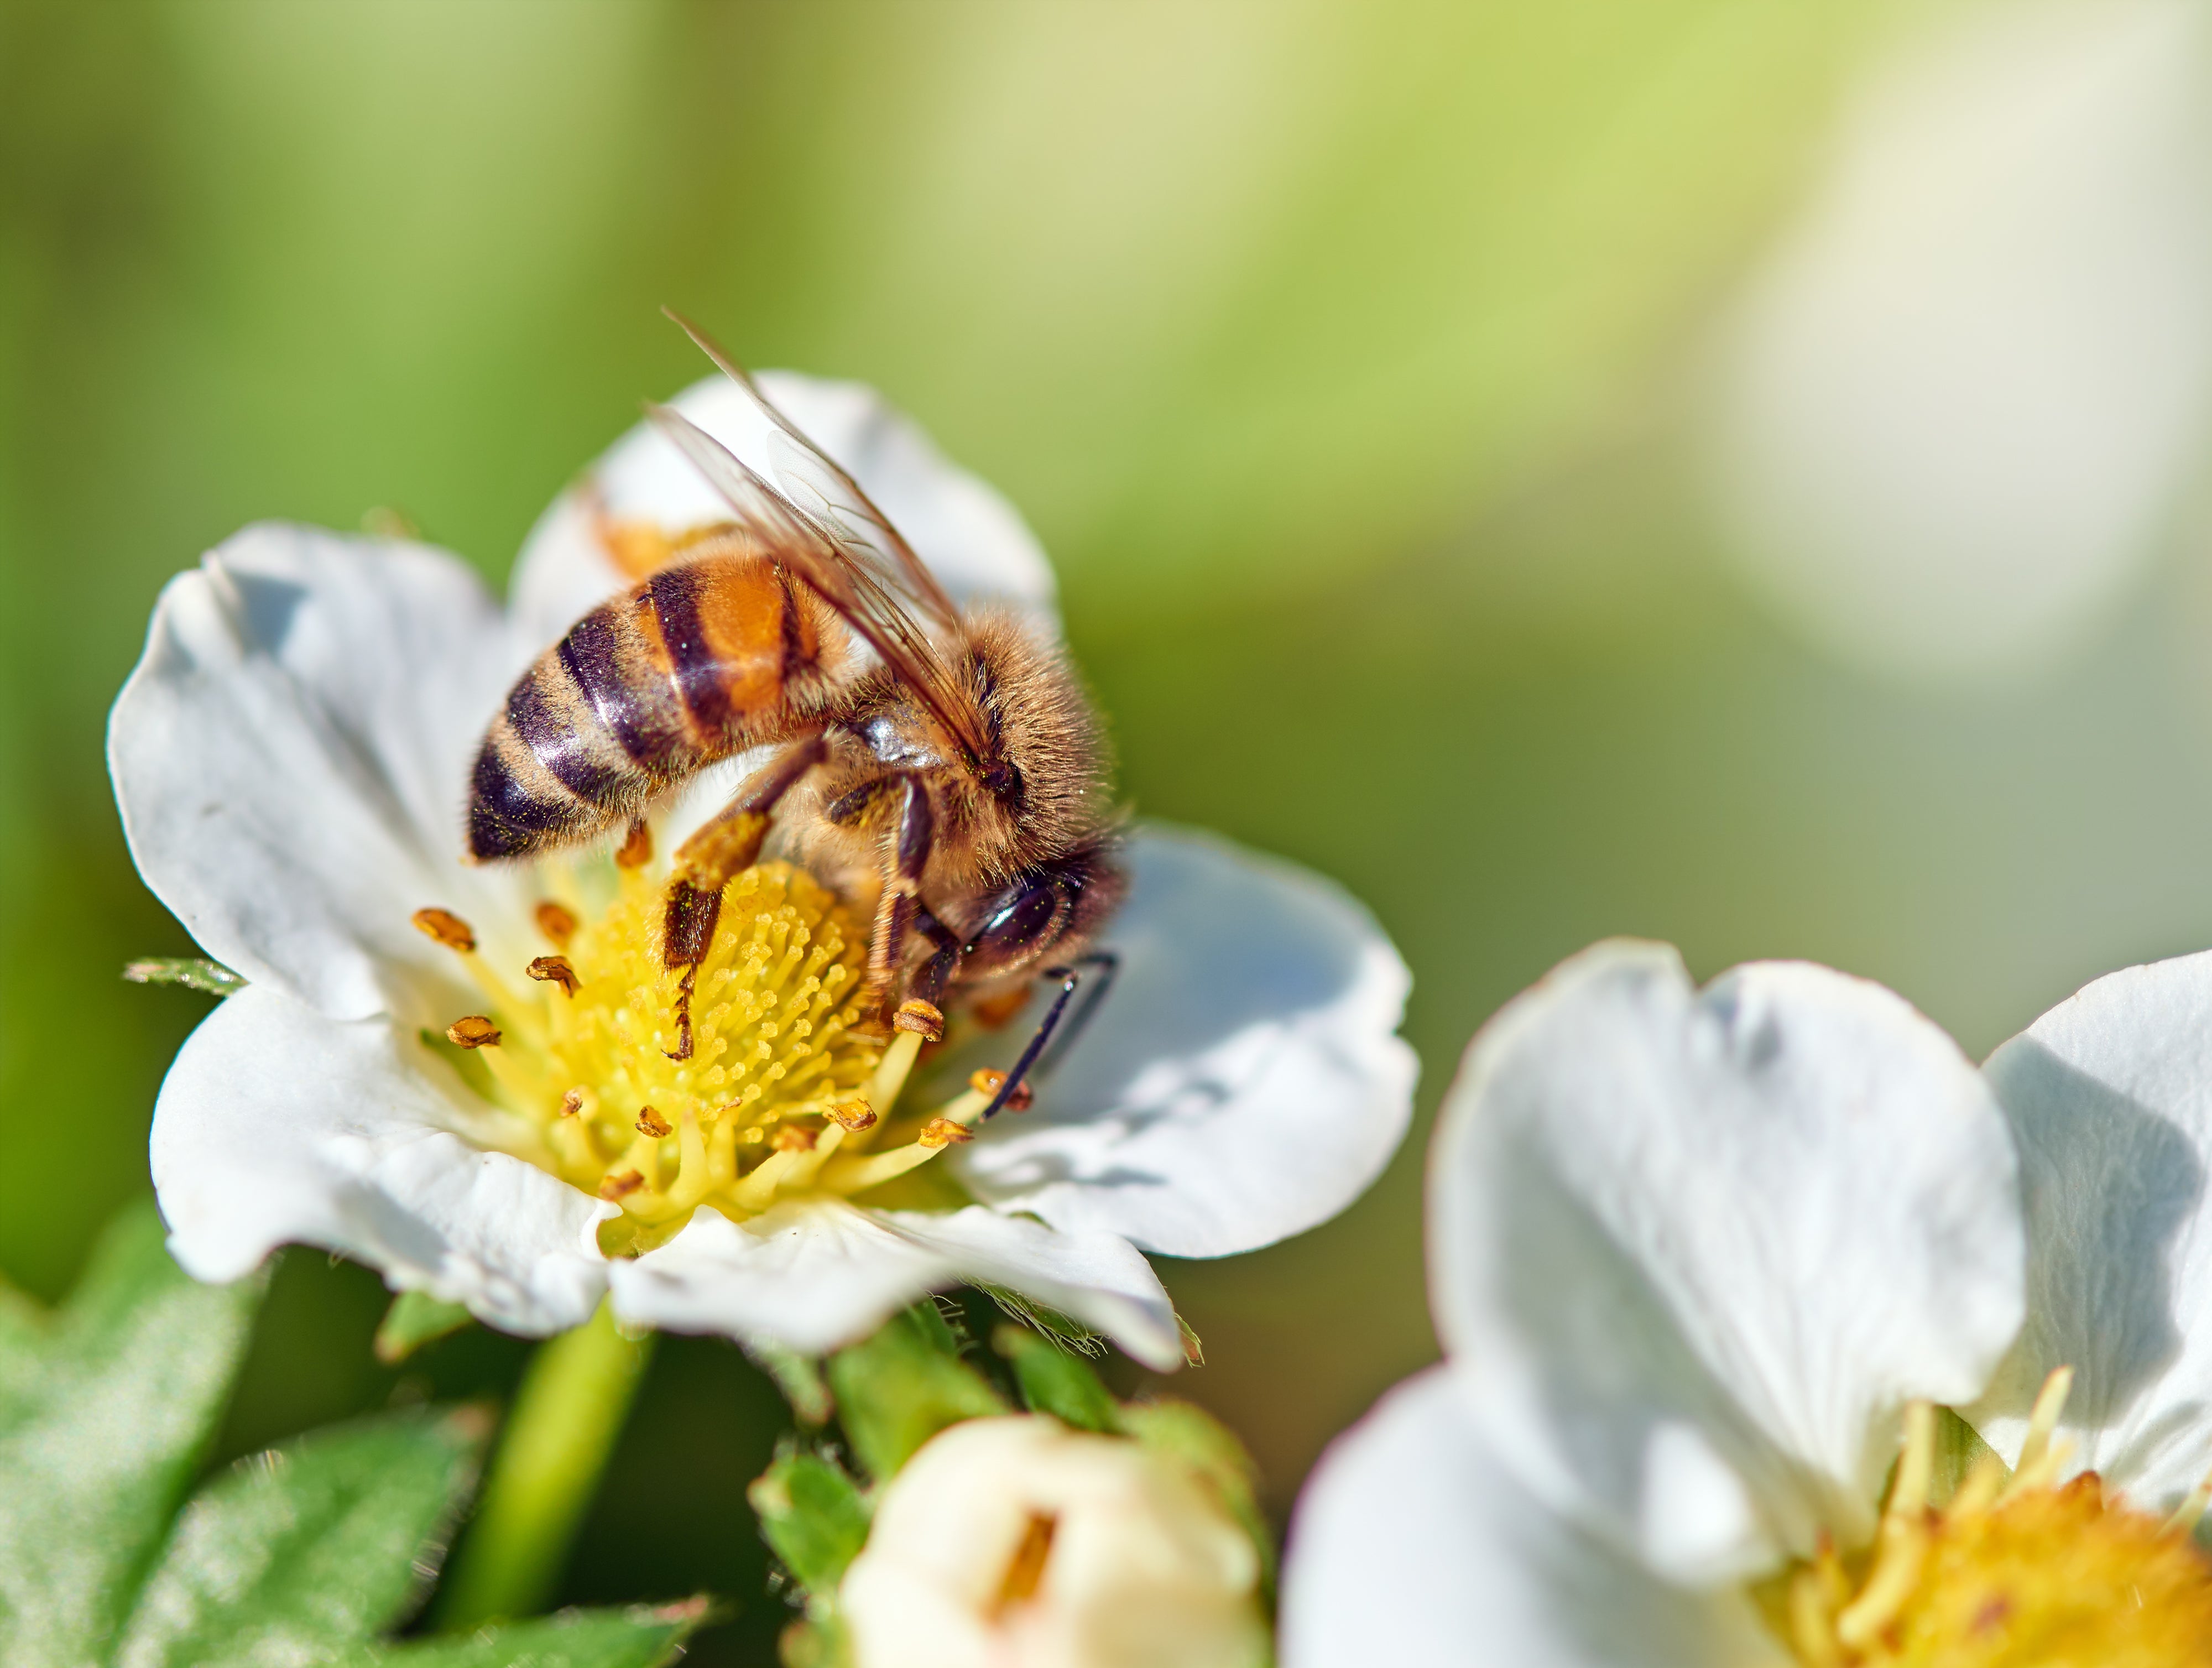 How to pollinate plants in the city instead of bees